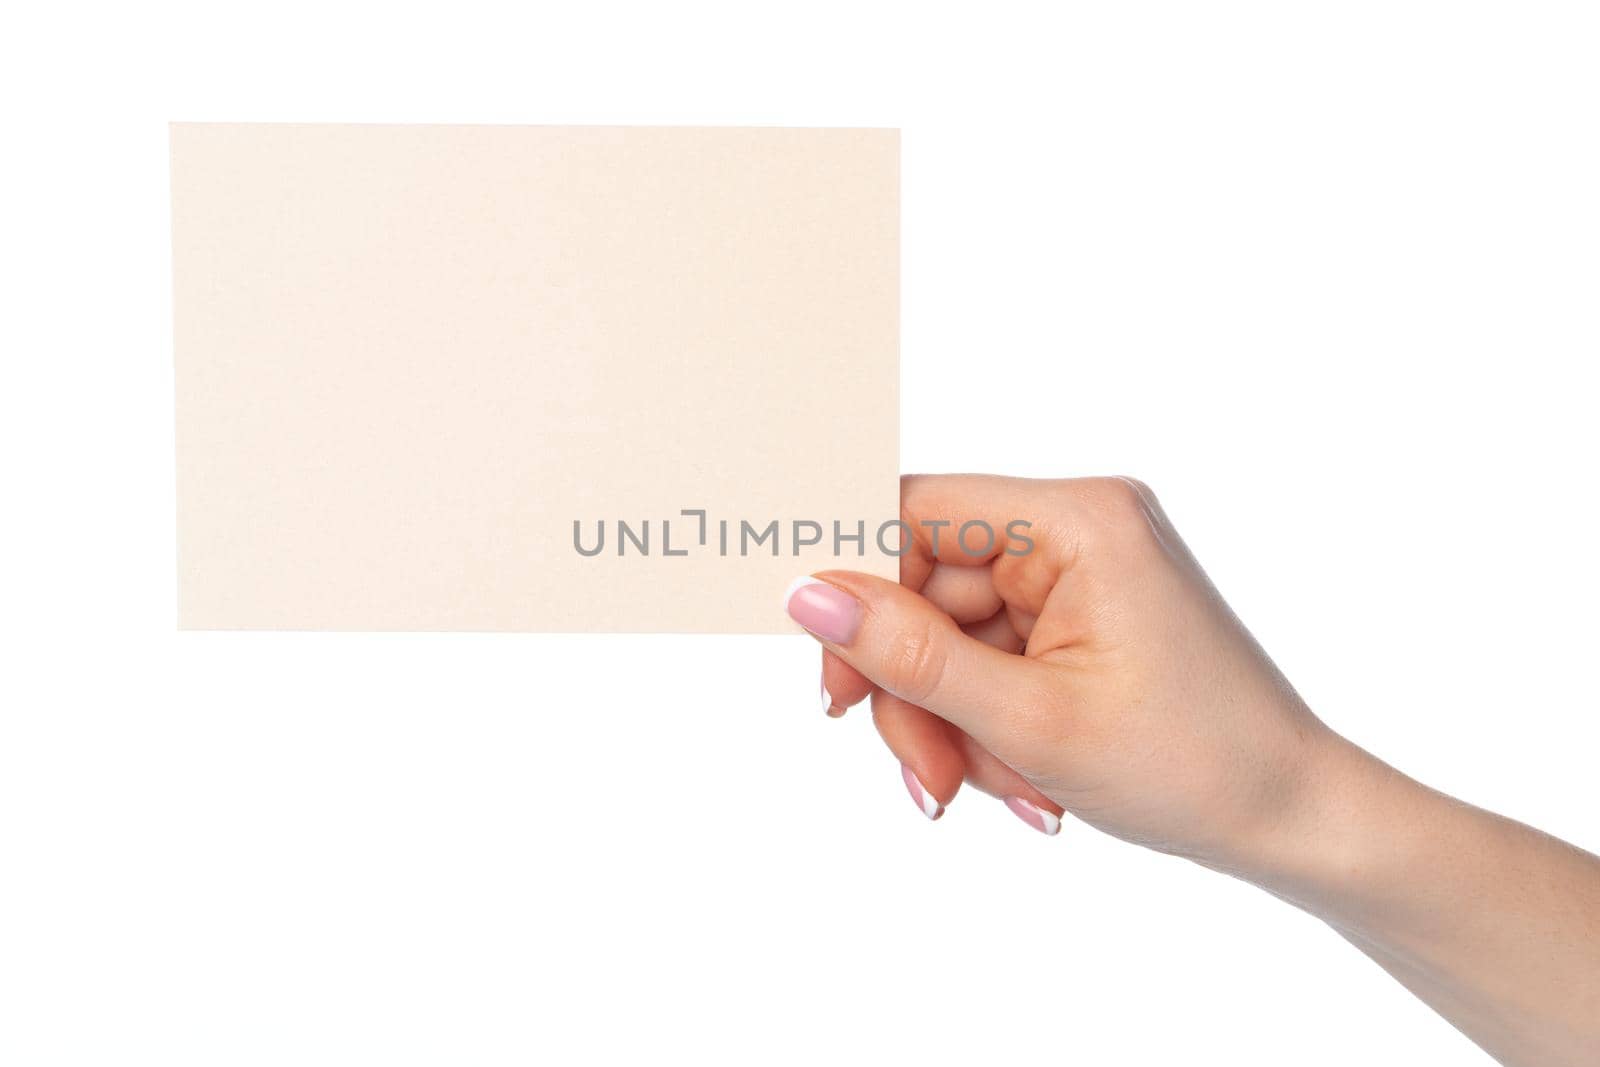 Female hand holding blank white sheet of paper isolated on white background